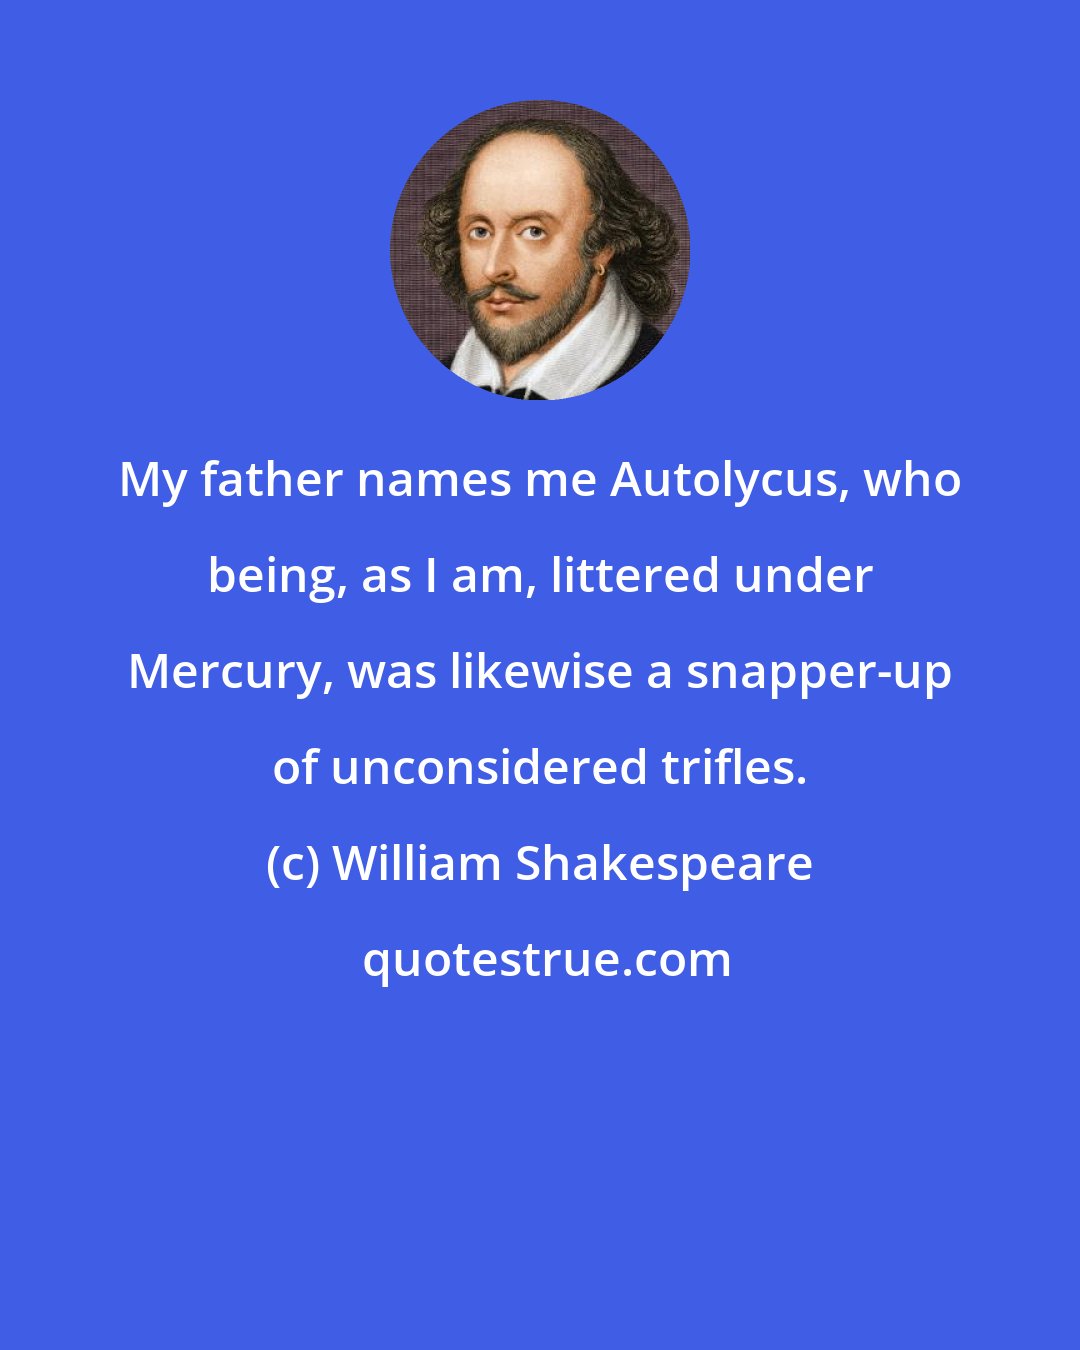 William Shakespeare: My father names me Autolycus, who being, as I am, littered under Mercury, was likewise a snapper-up of unconsidered trifles.